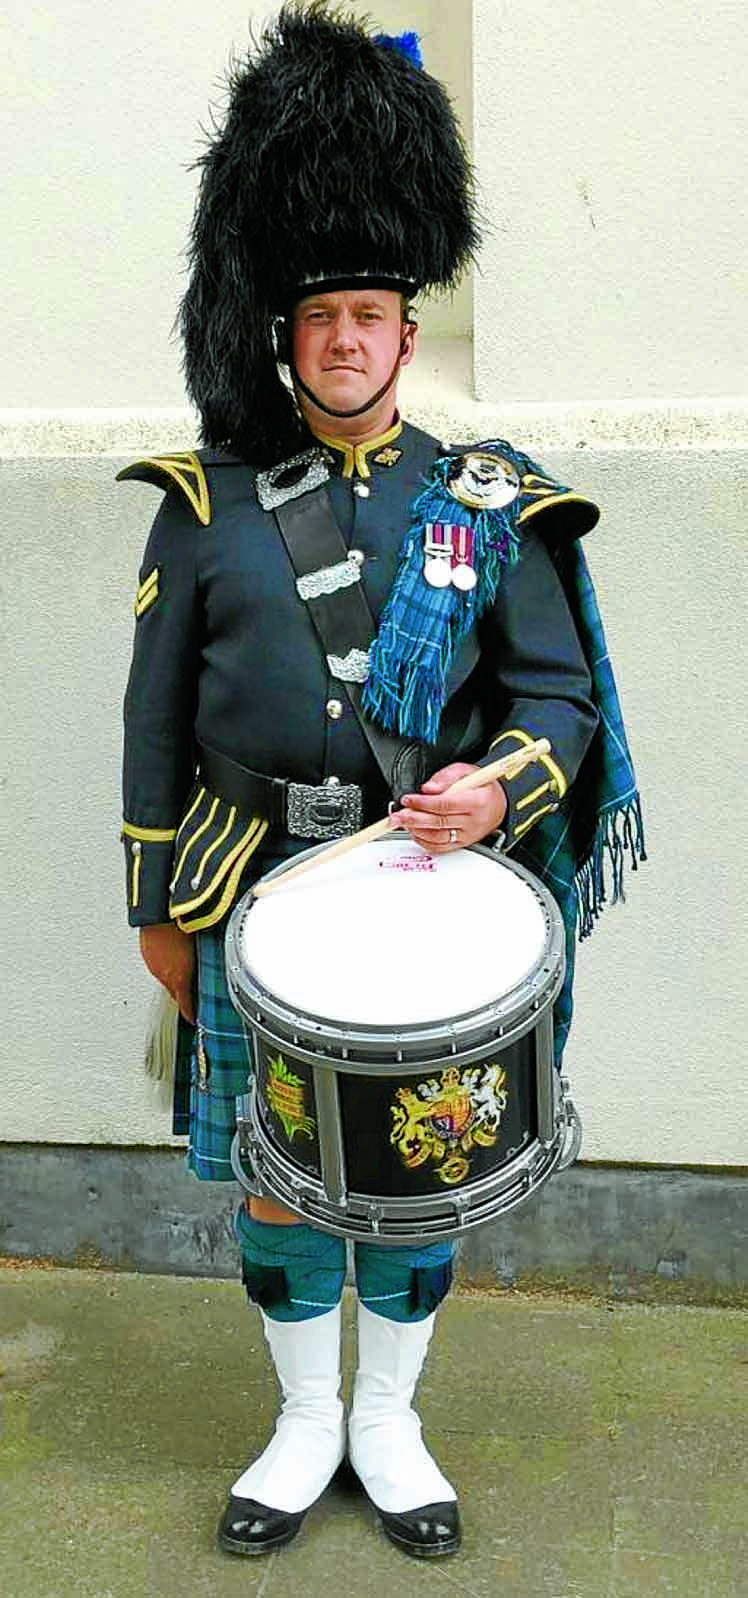 Parade role for drummer